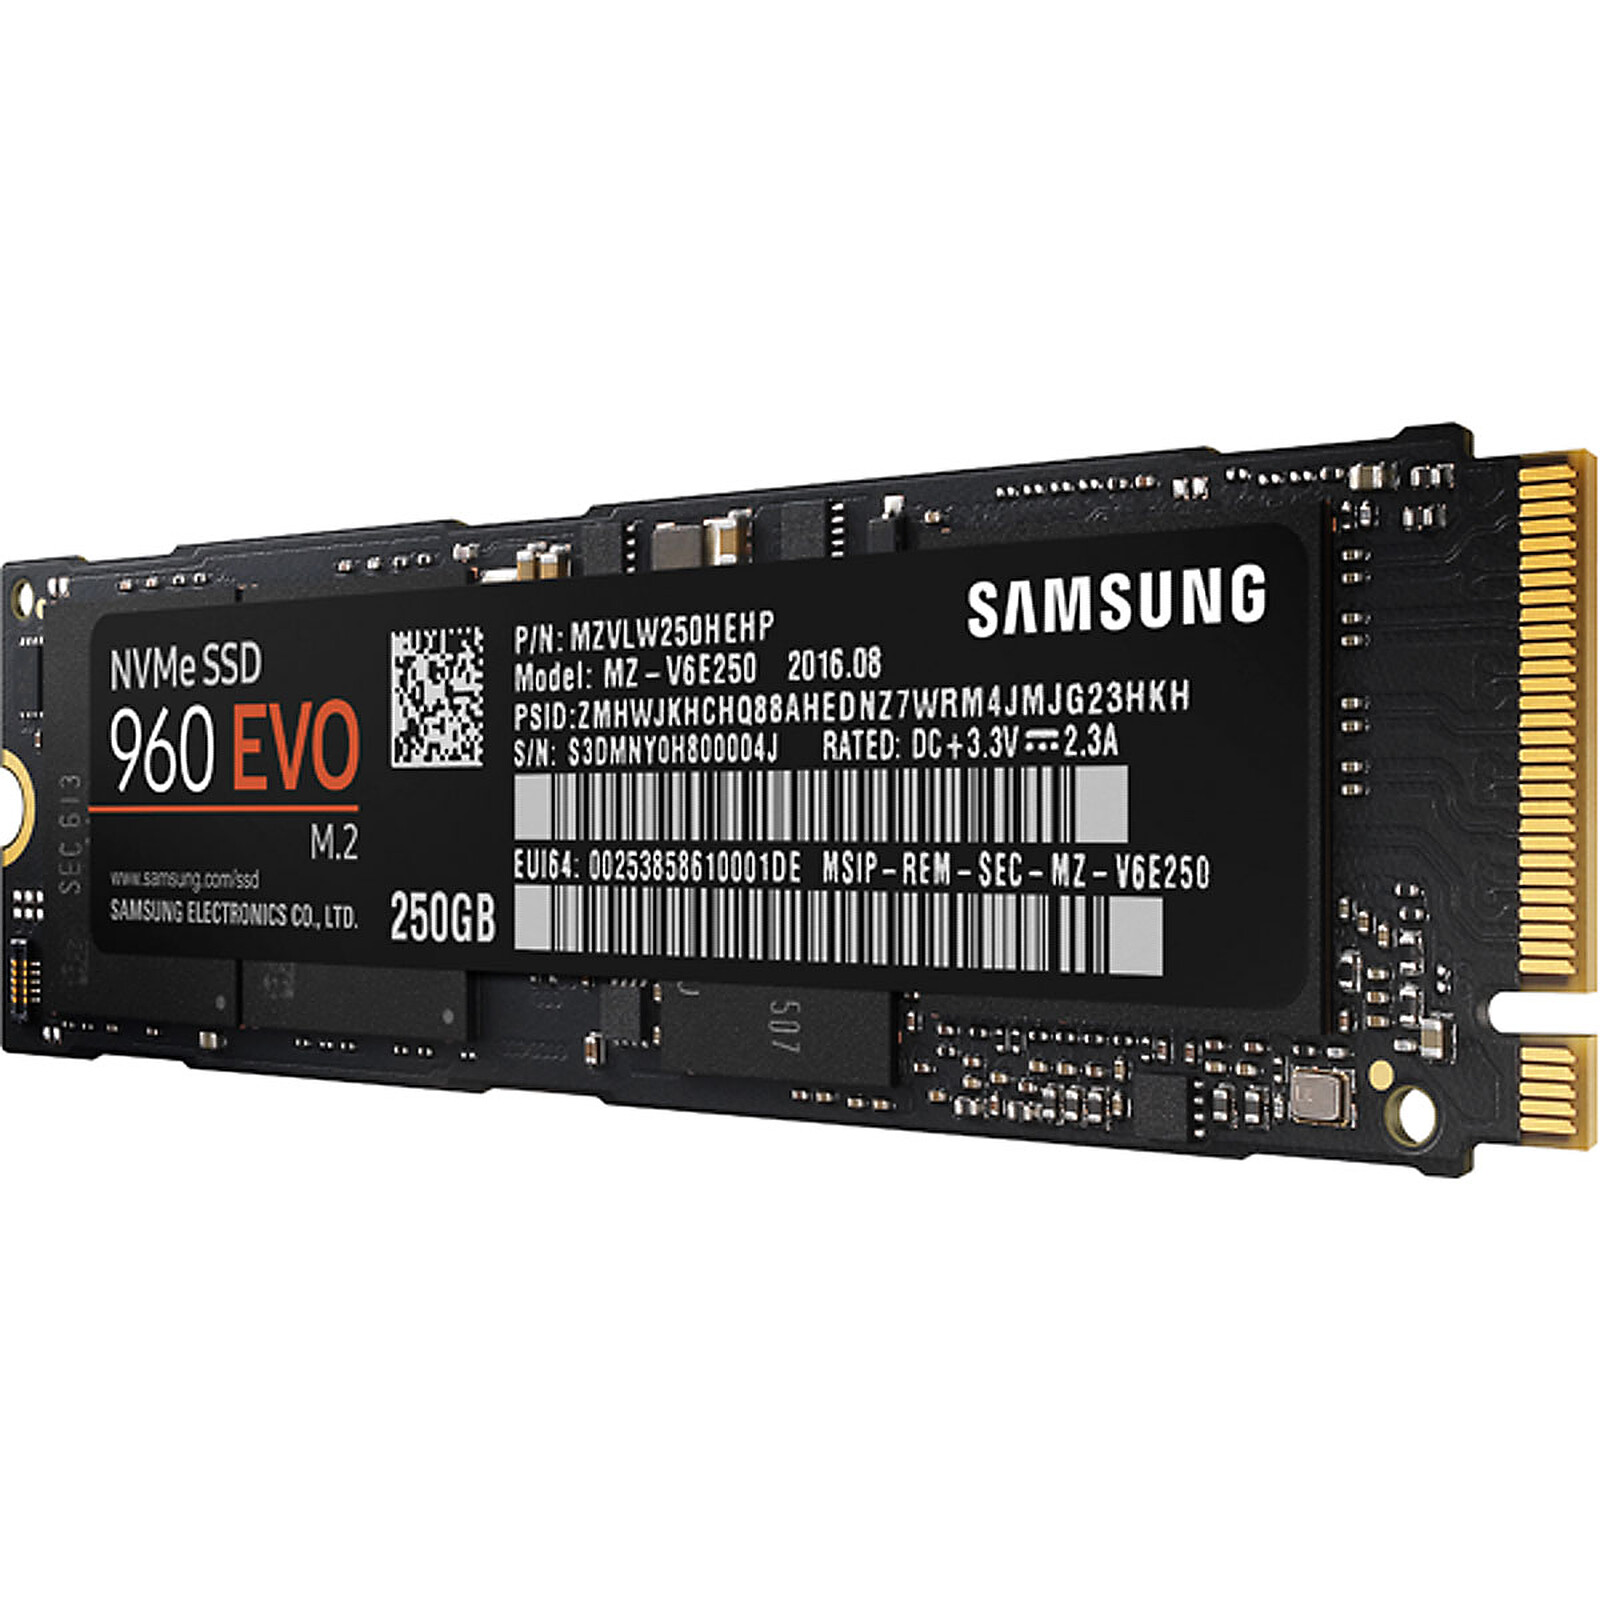 Disque dur SSD Interne 512Go, 1To, Crucial P2 Vitesses atteignant 2400 Mo/s  (3D NAND, NVMe, PCIe, M.2)